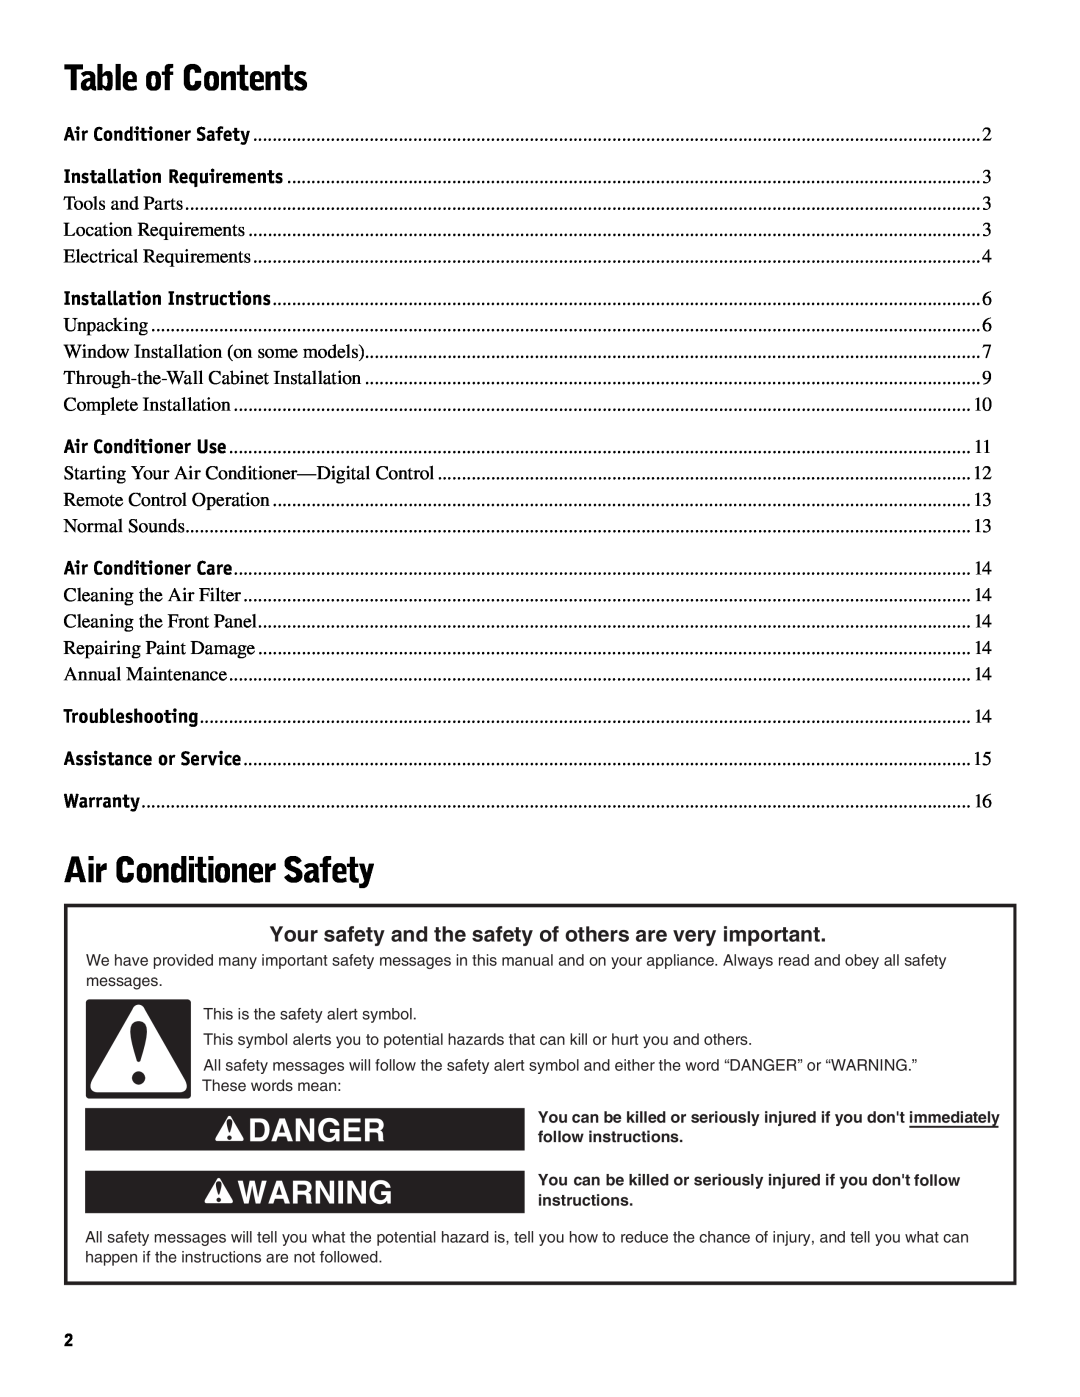 Friedrich CP24, CP14, CP18 manual Table of Contents, Air Conditioner Safety, Danger 